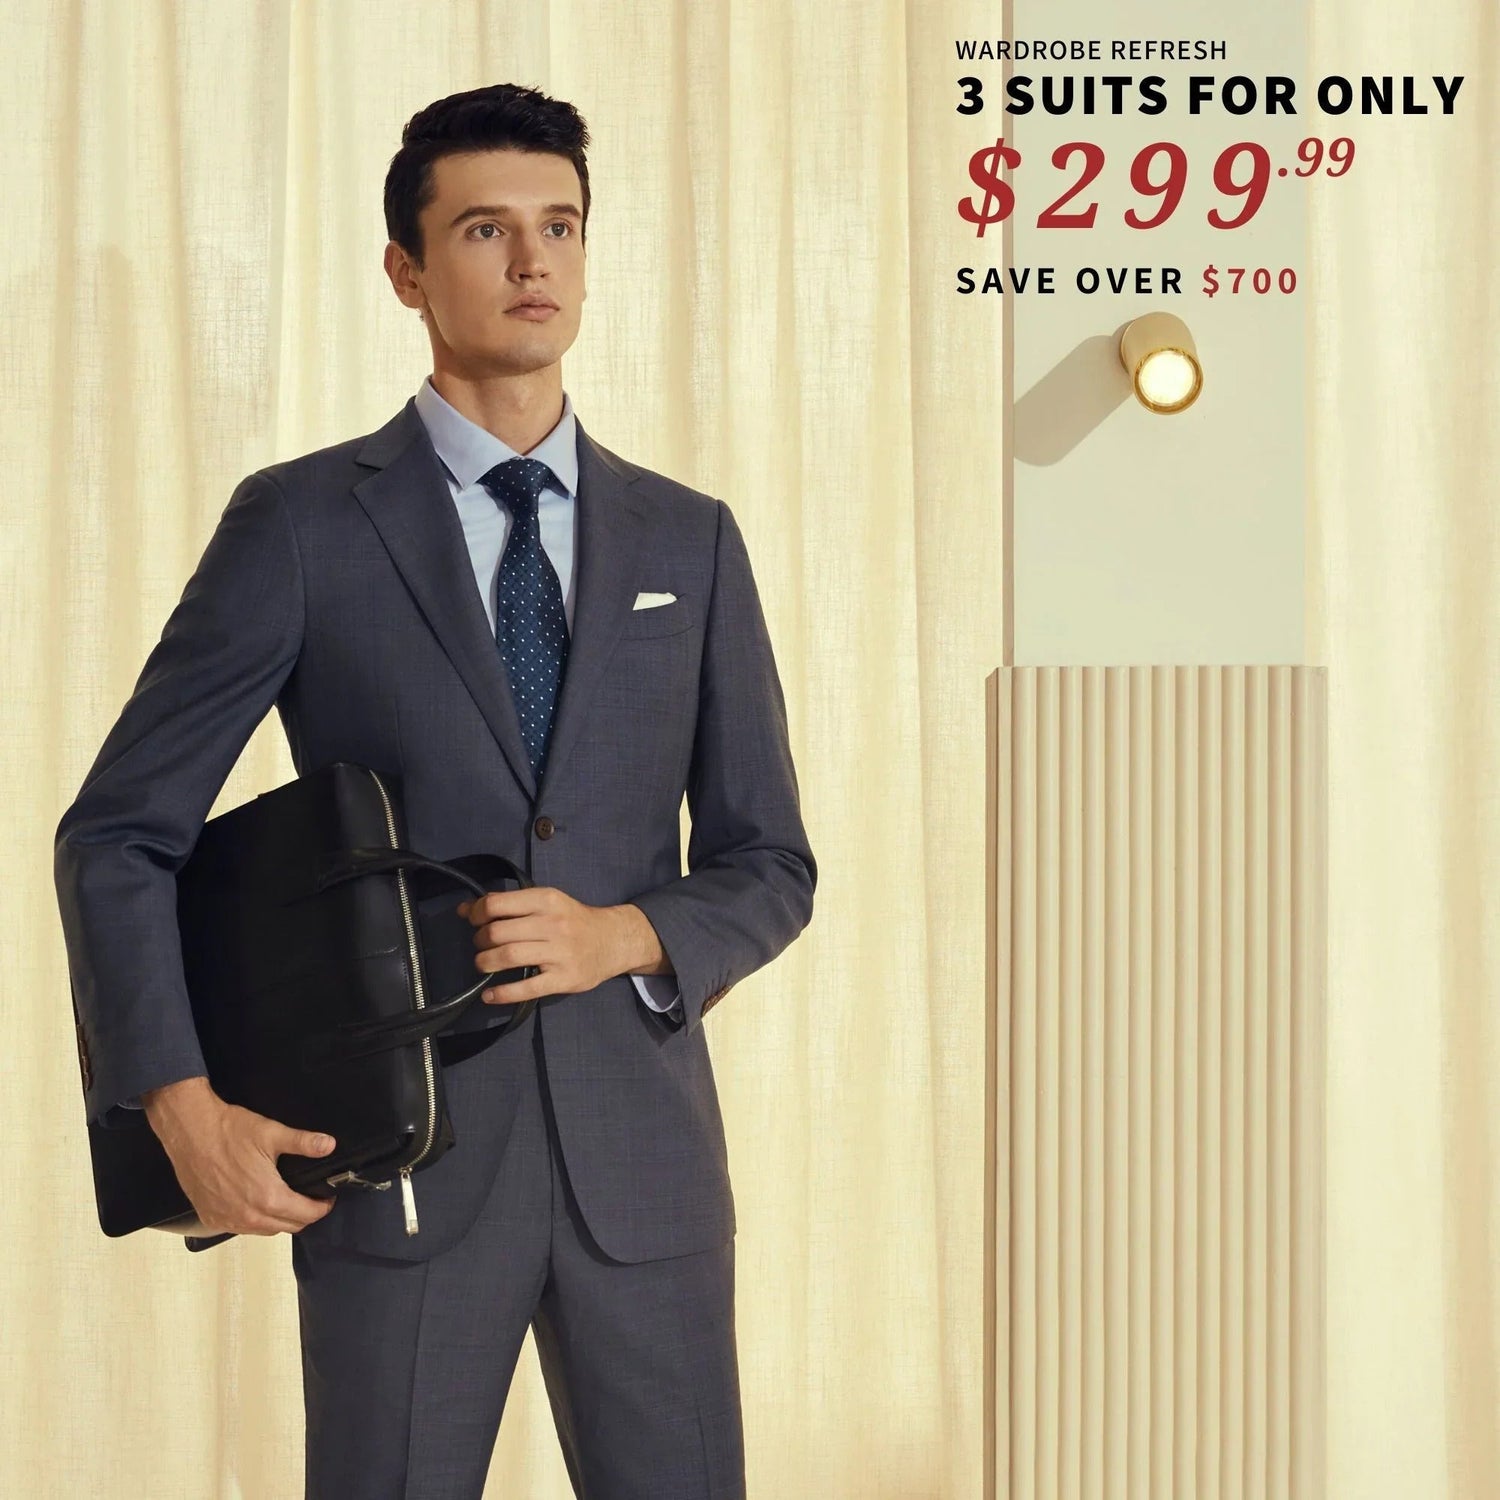 A man in a suit is holding a briefcase, his BYOB suits for $299 perfectly suited for his professional attire.